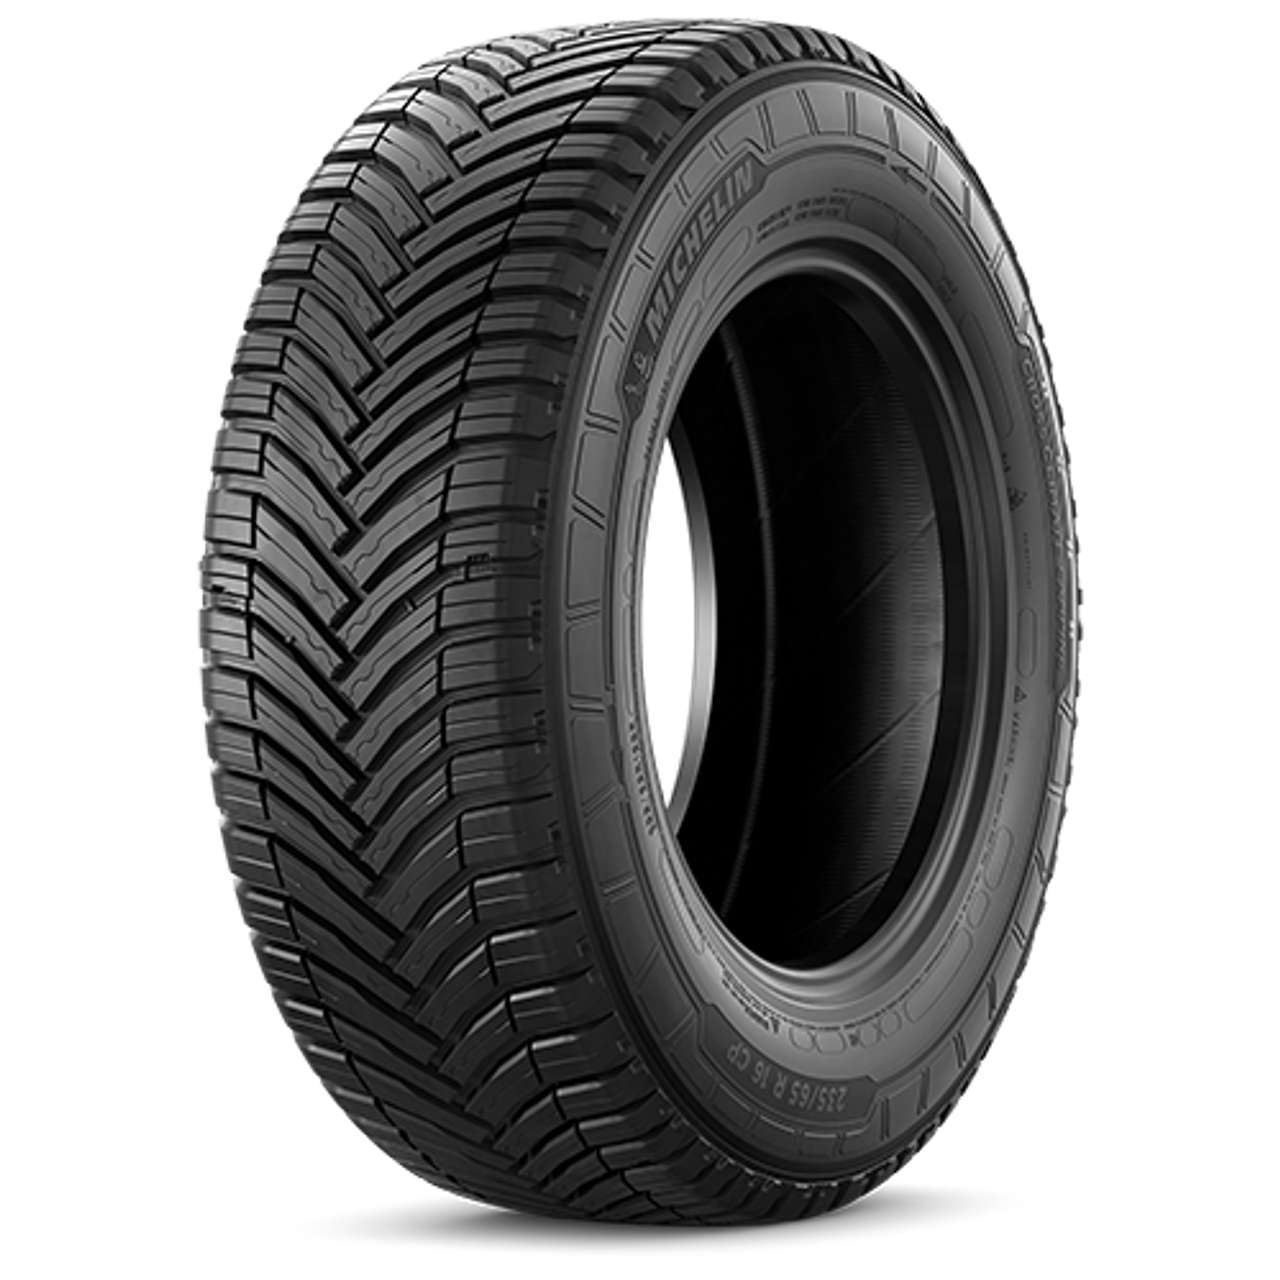 MICHELIN CROSSCLIMATE CAMPING 225/75R16 116R BSW